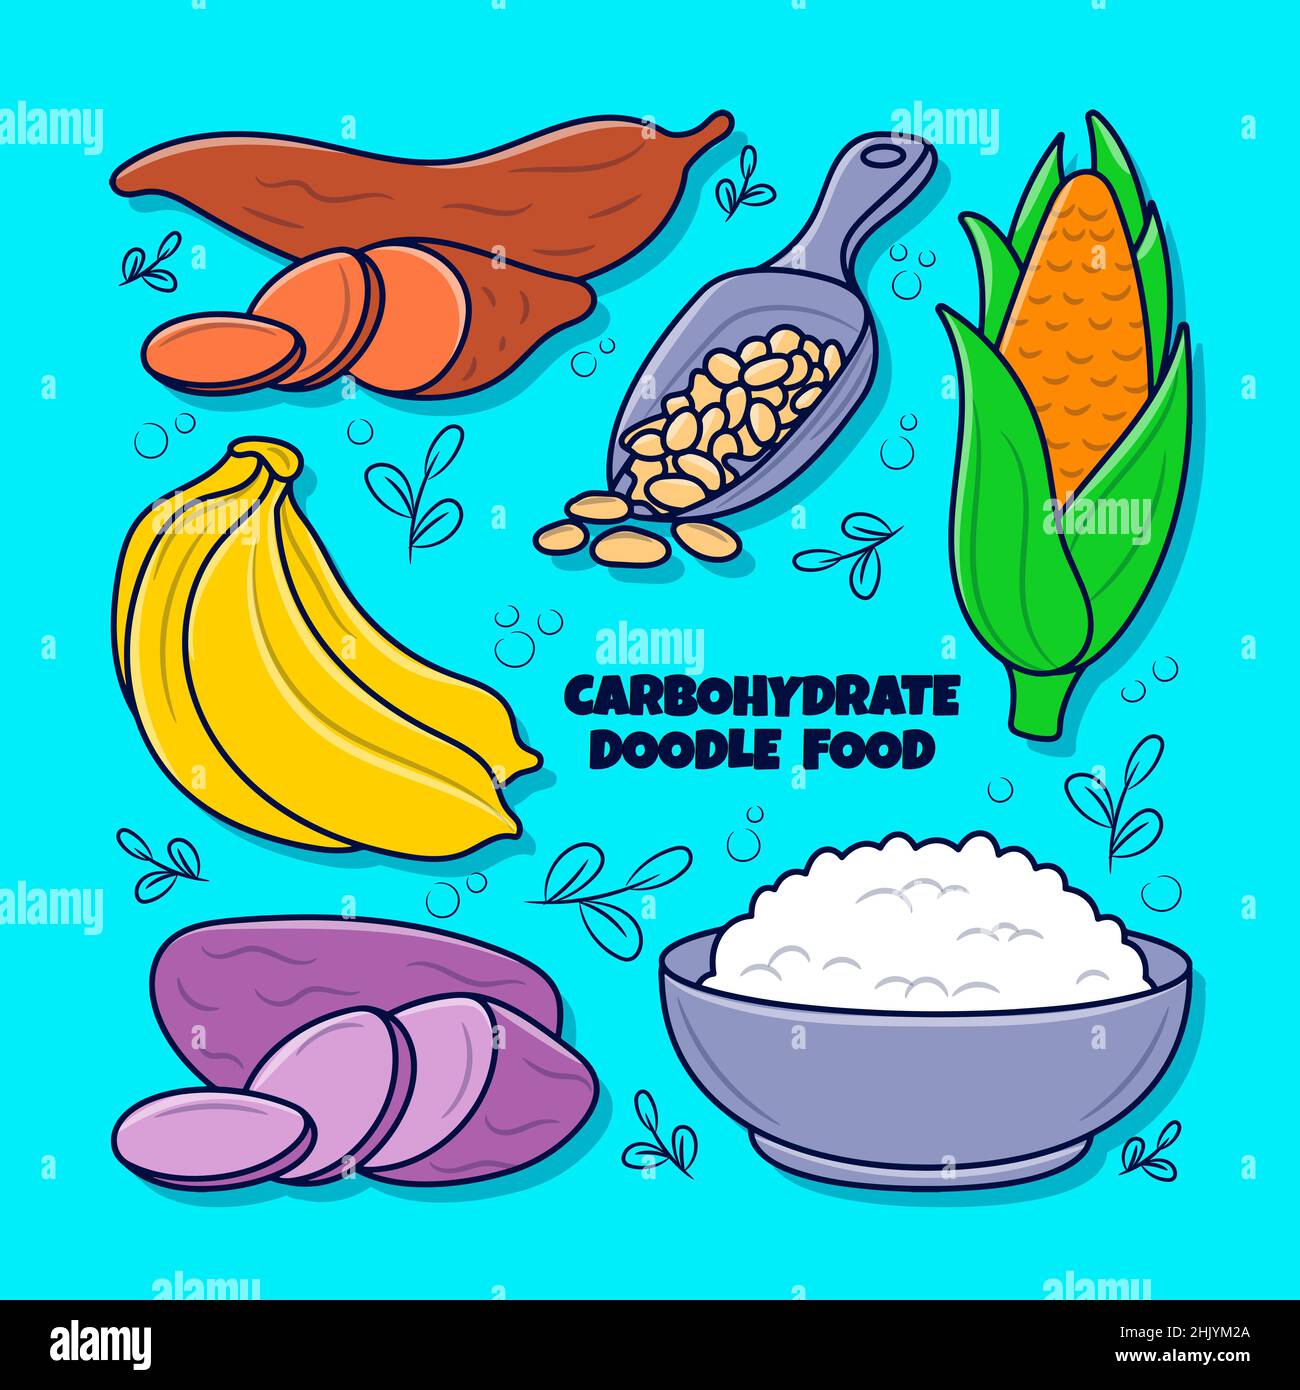 Carbohydrate food element set with colored hand drawn illustration Stock Vector